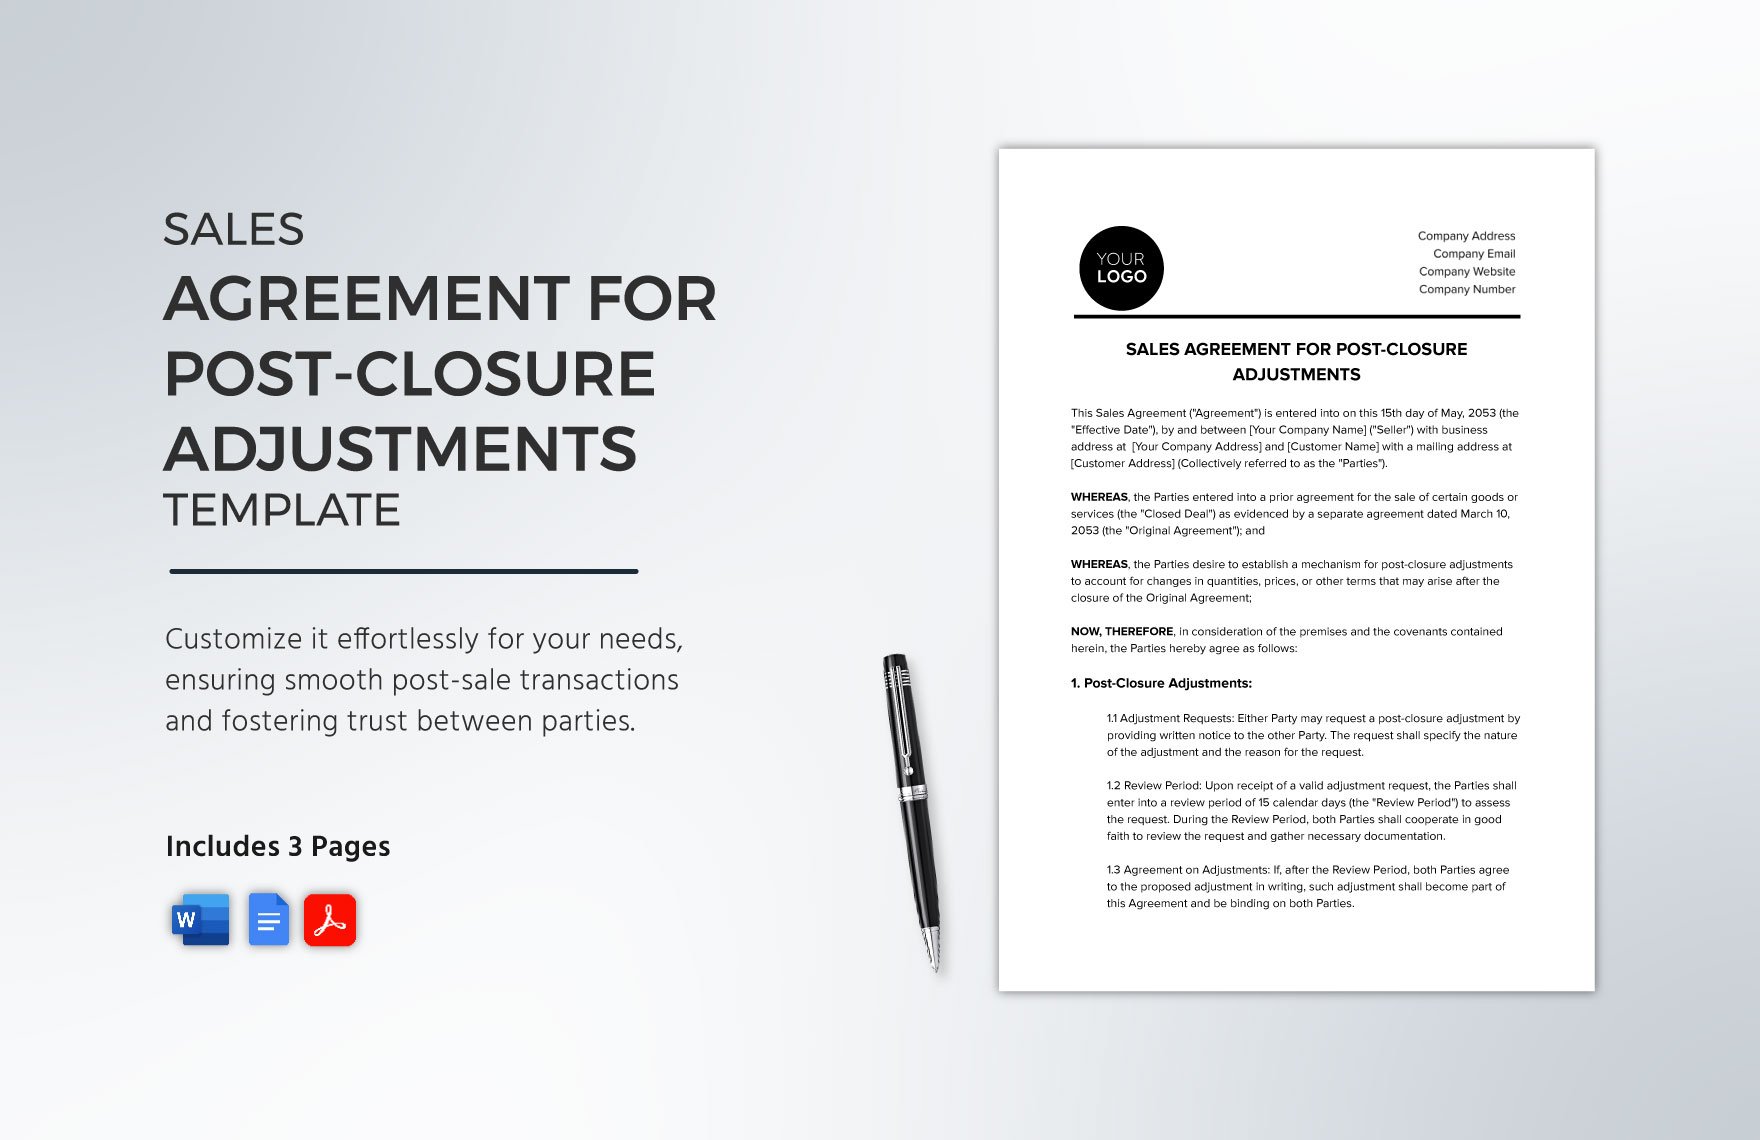 Sales Agreement for Post-Closure Adjustments Template